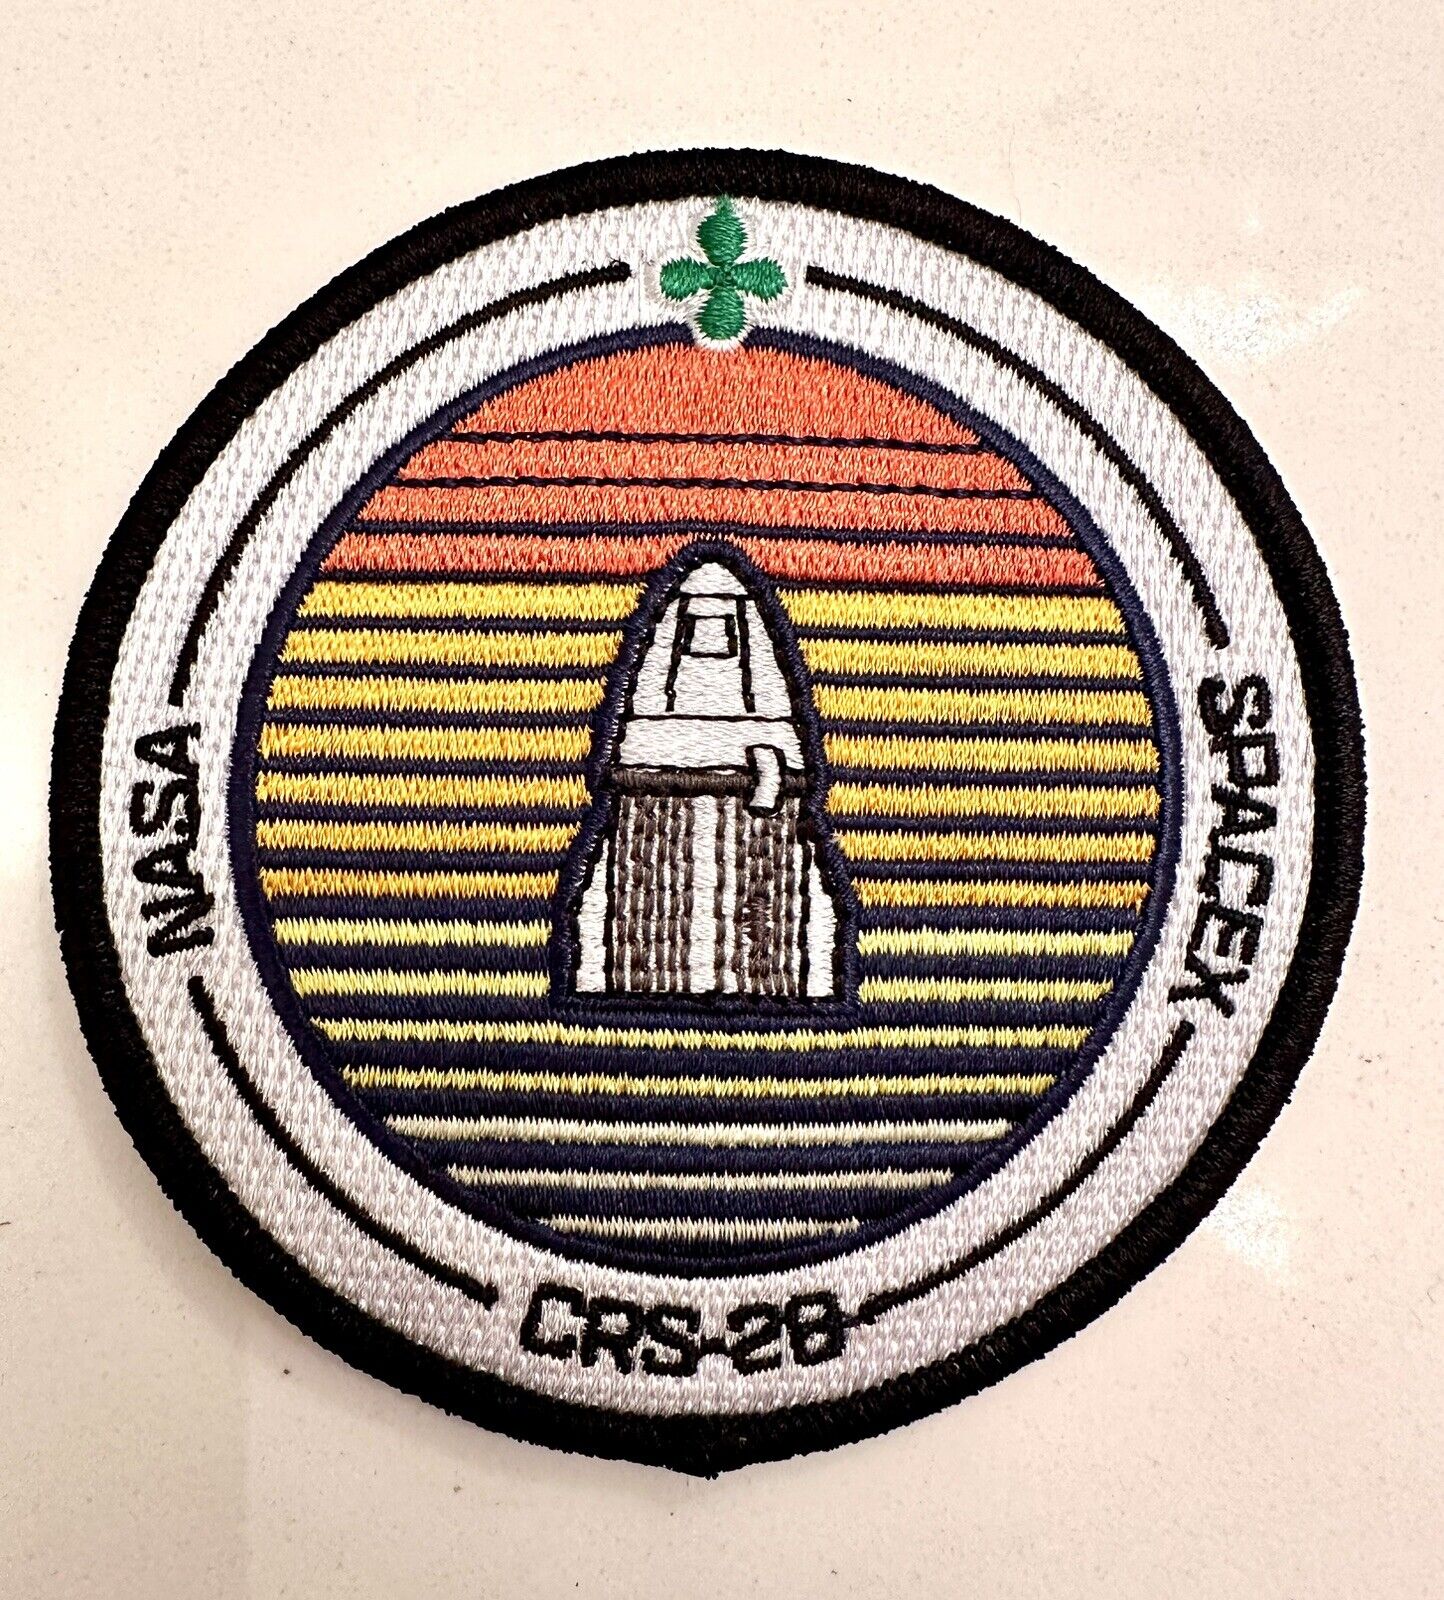 Original SPACEX CRS-26 DRAGON ISS RESUPPLY MISSION PATCH 3” NASA FALCON 9